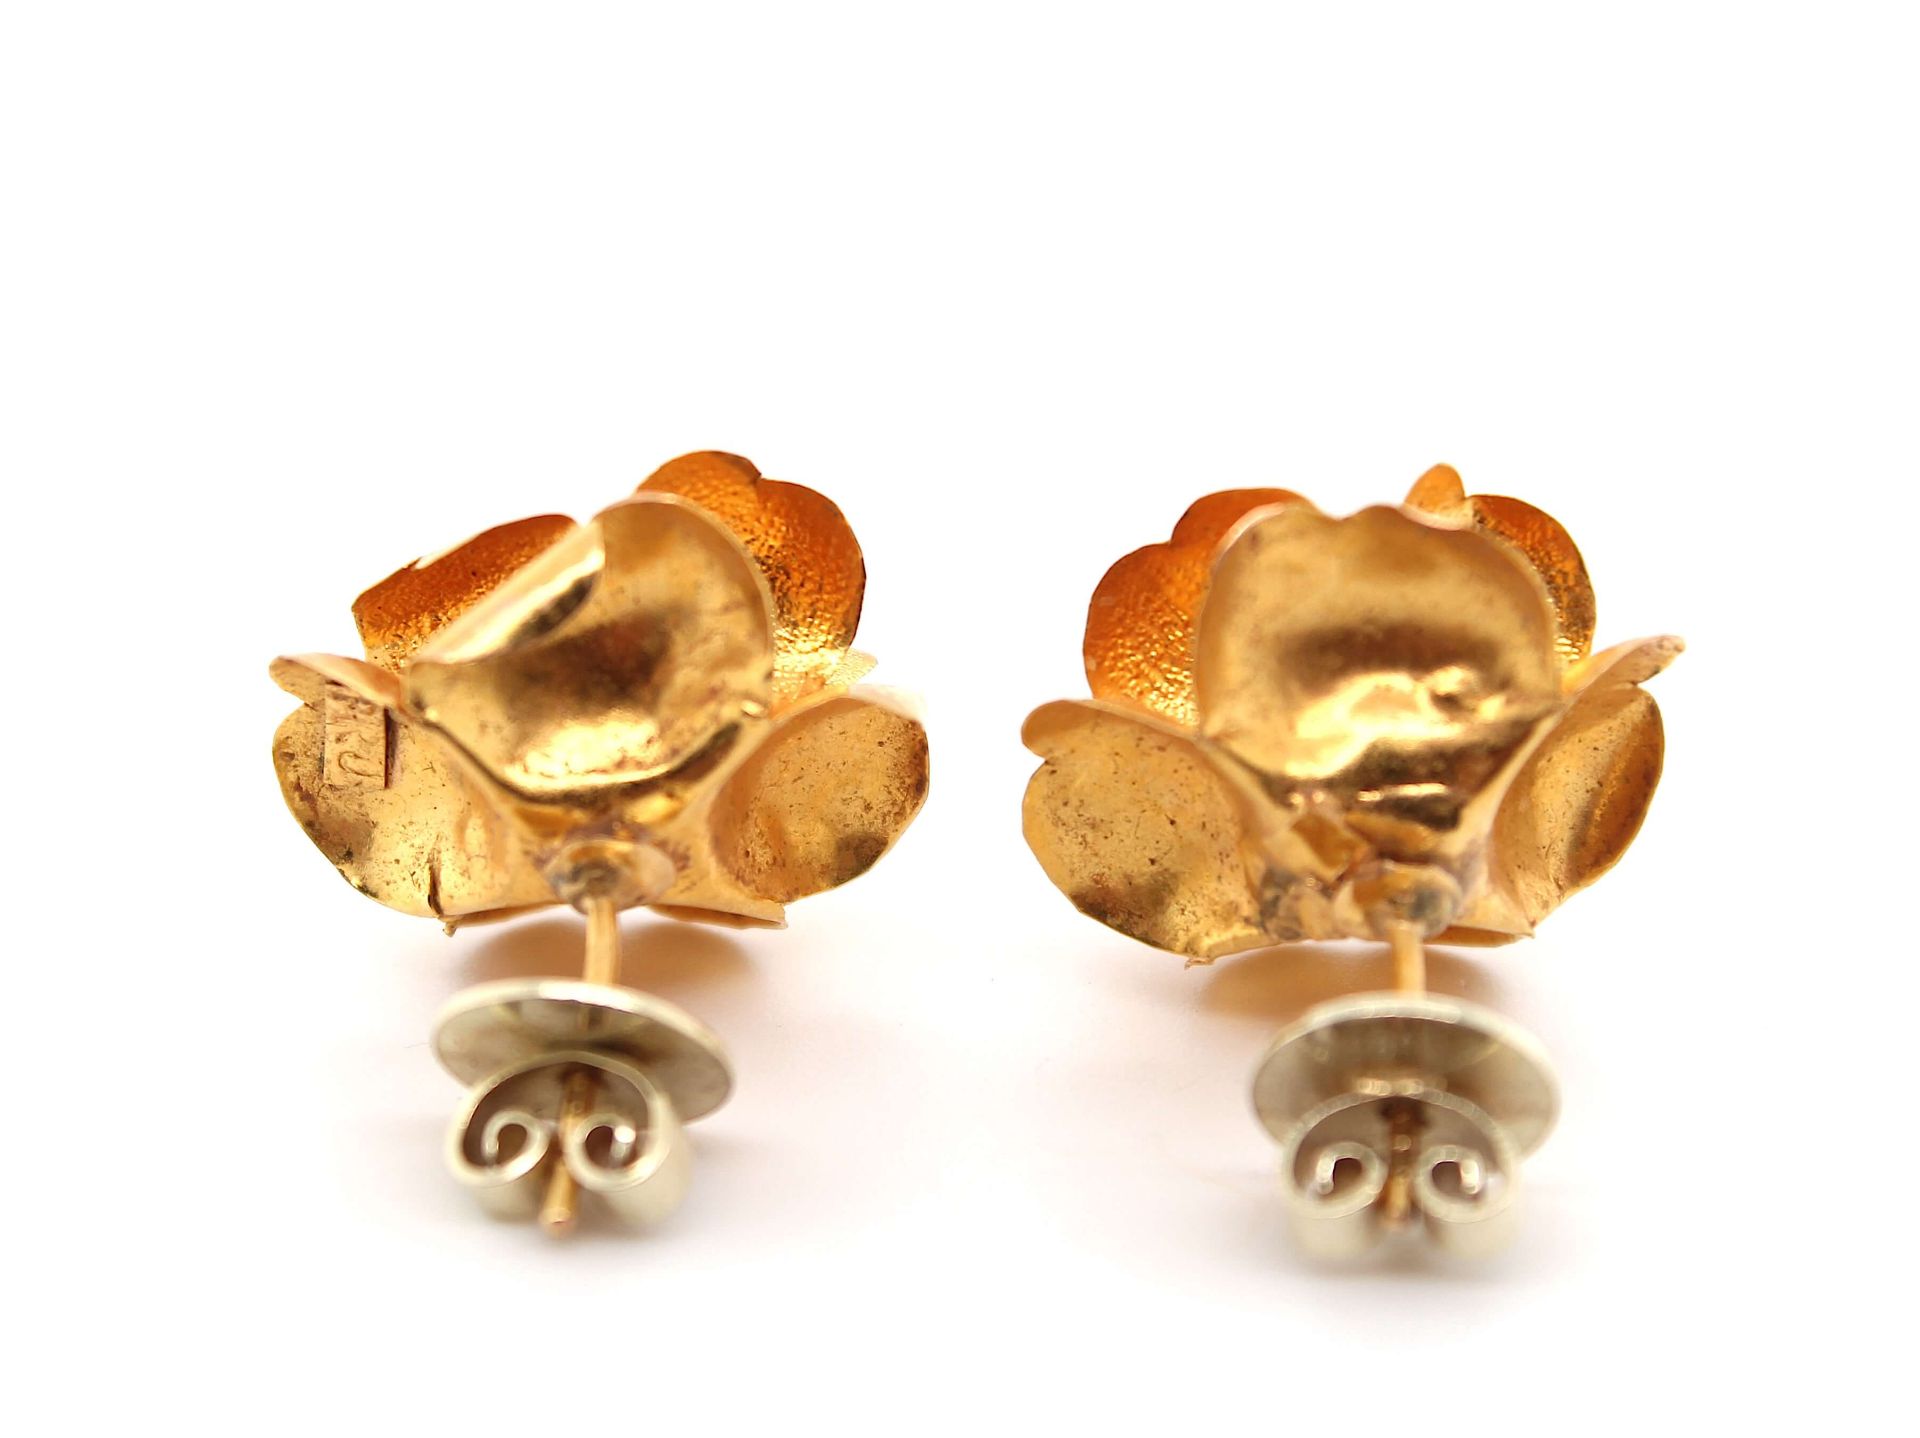 1 pair of ear studs in the shape of a flower 21 ct - Image 3 of 3